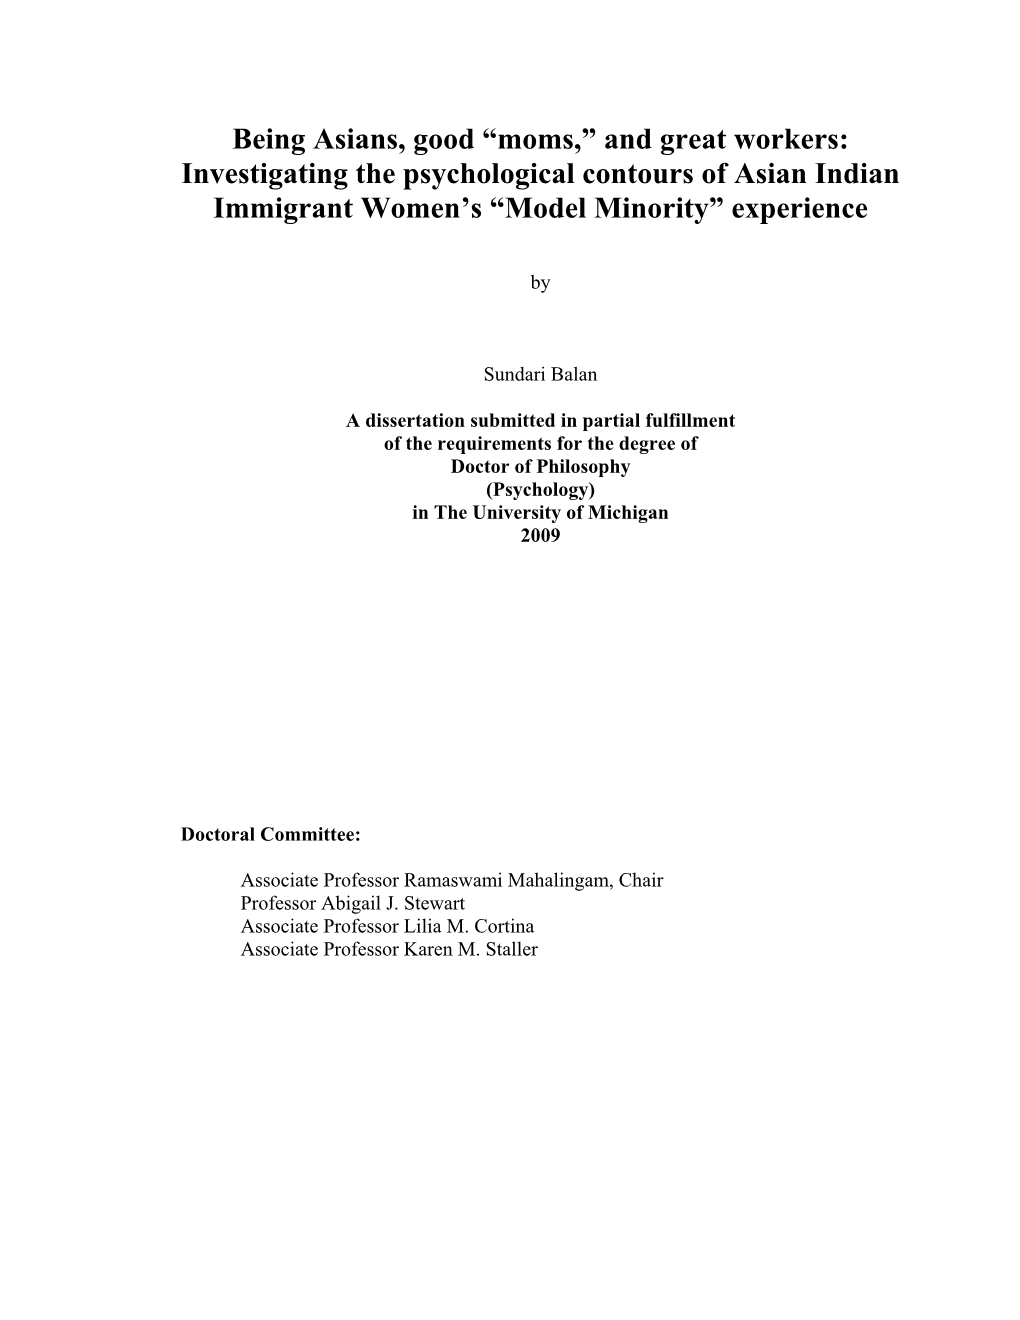 Investigating the Psychological Contours of Asian Indian Immigrant Women’S “Model Minority” Experience